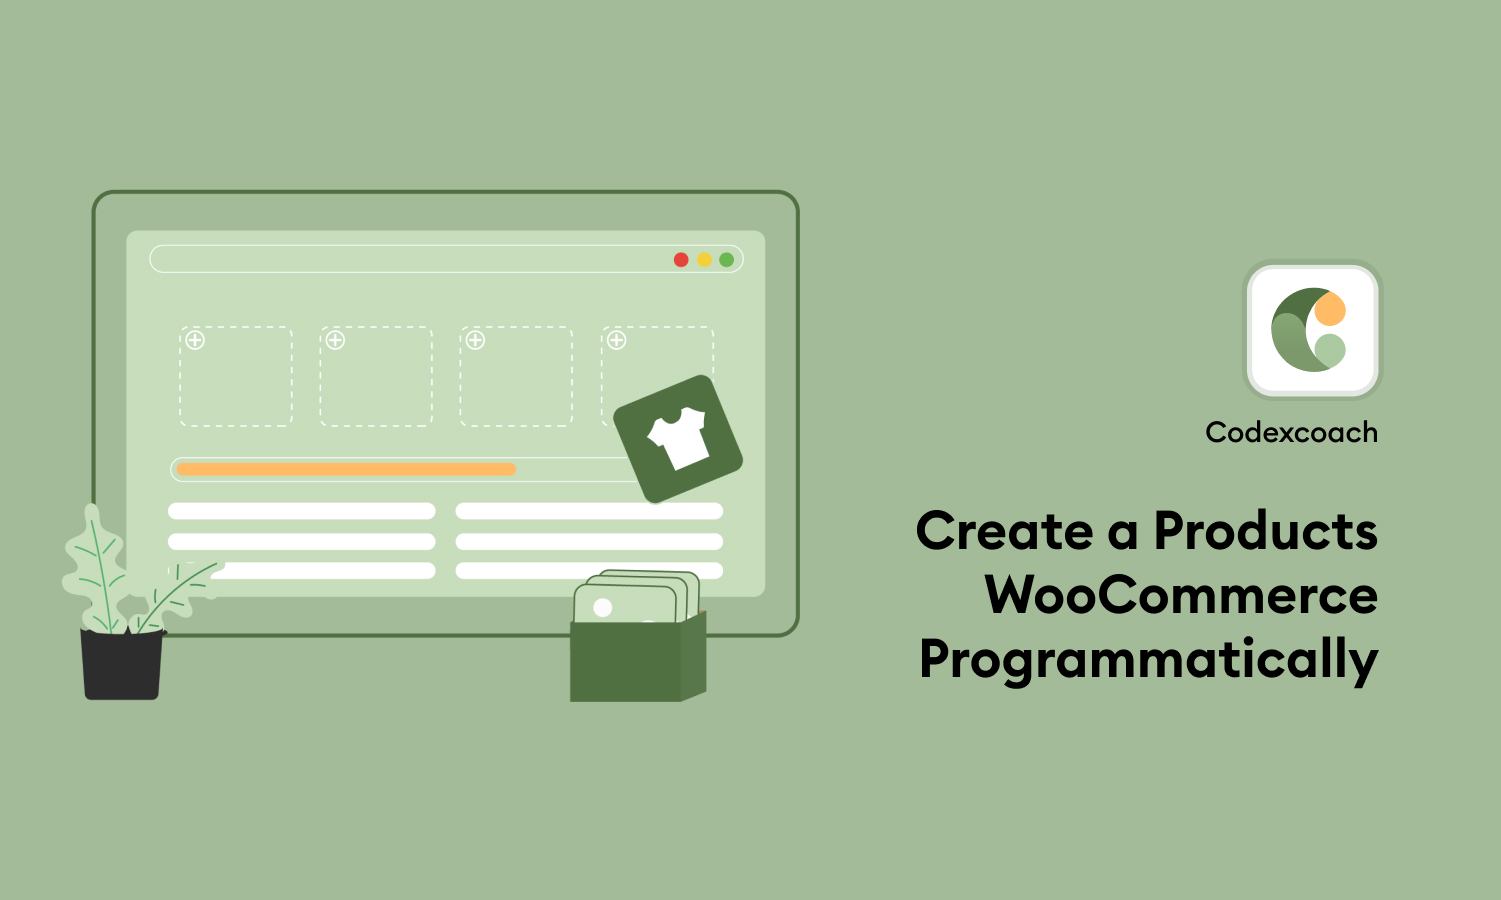 Create a Products WooCommerce Programmatically